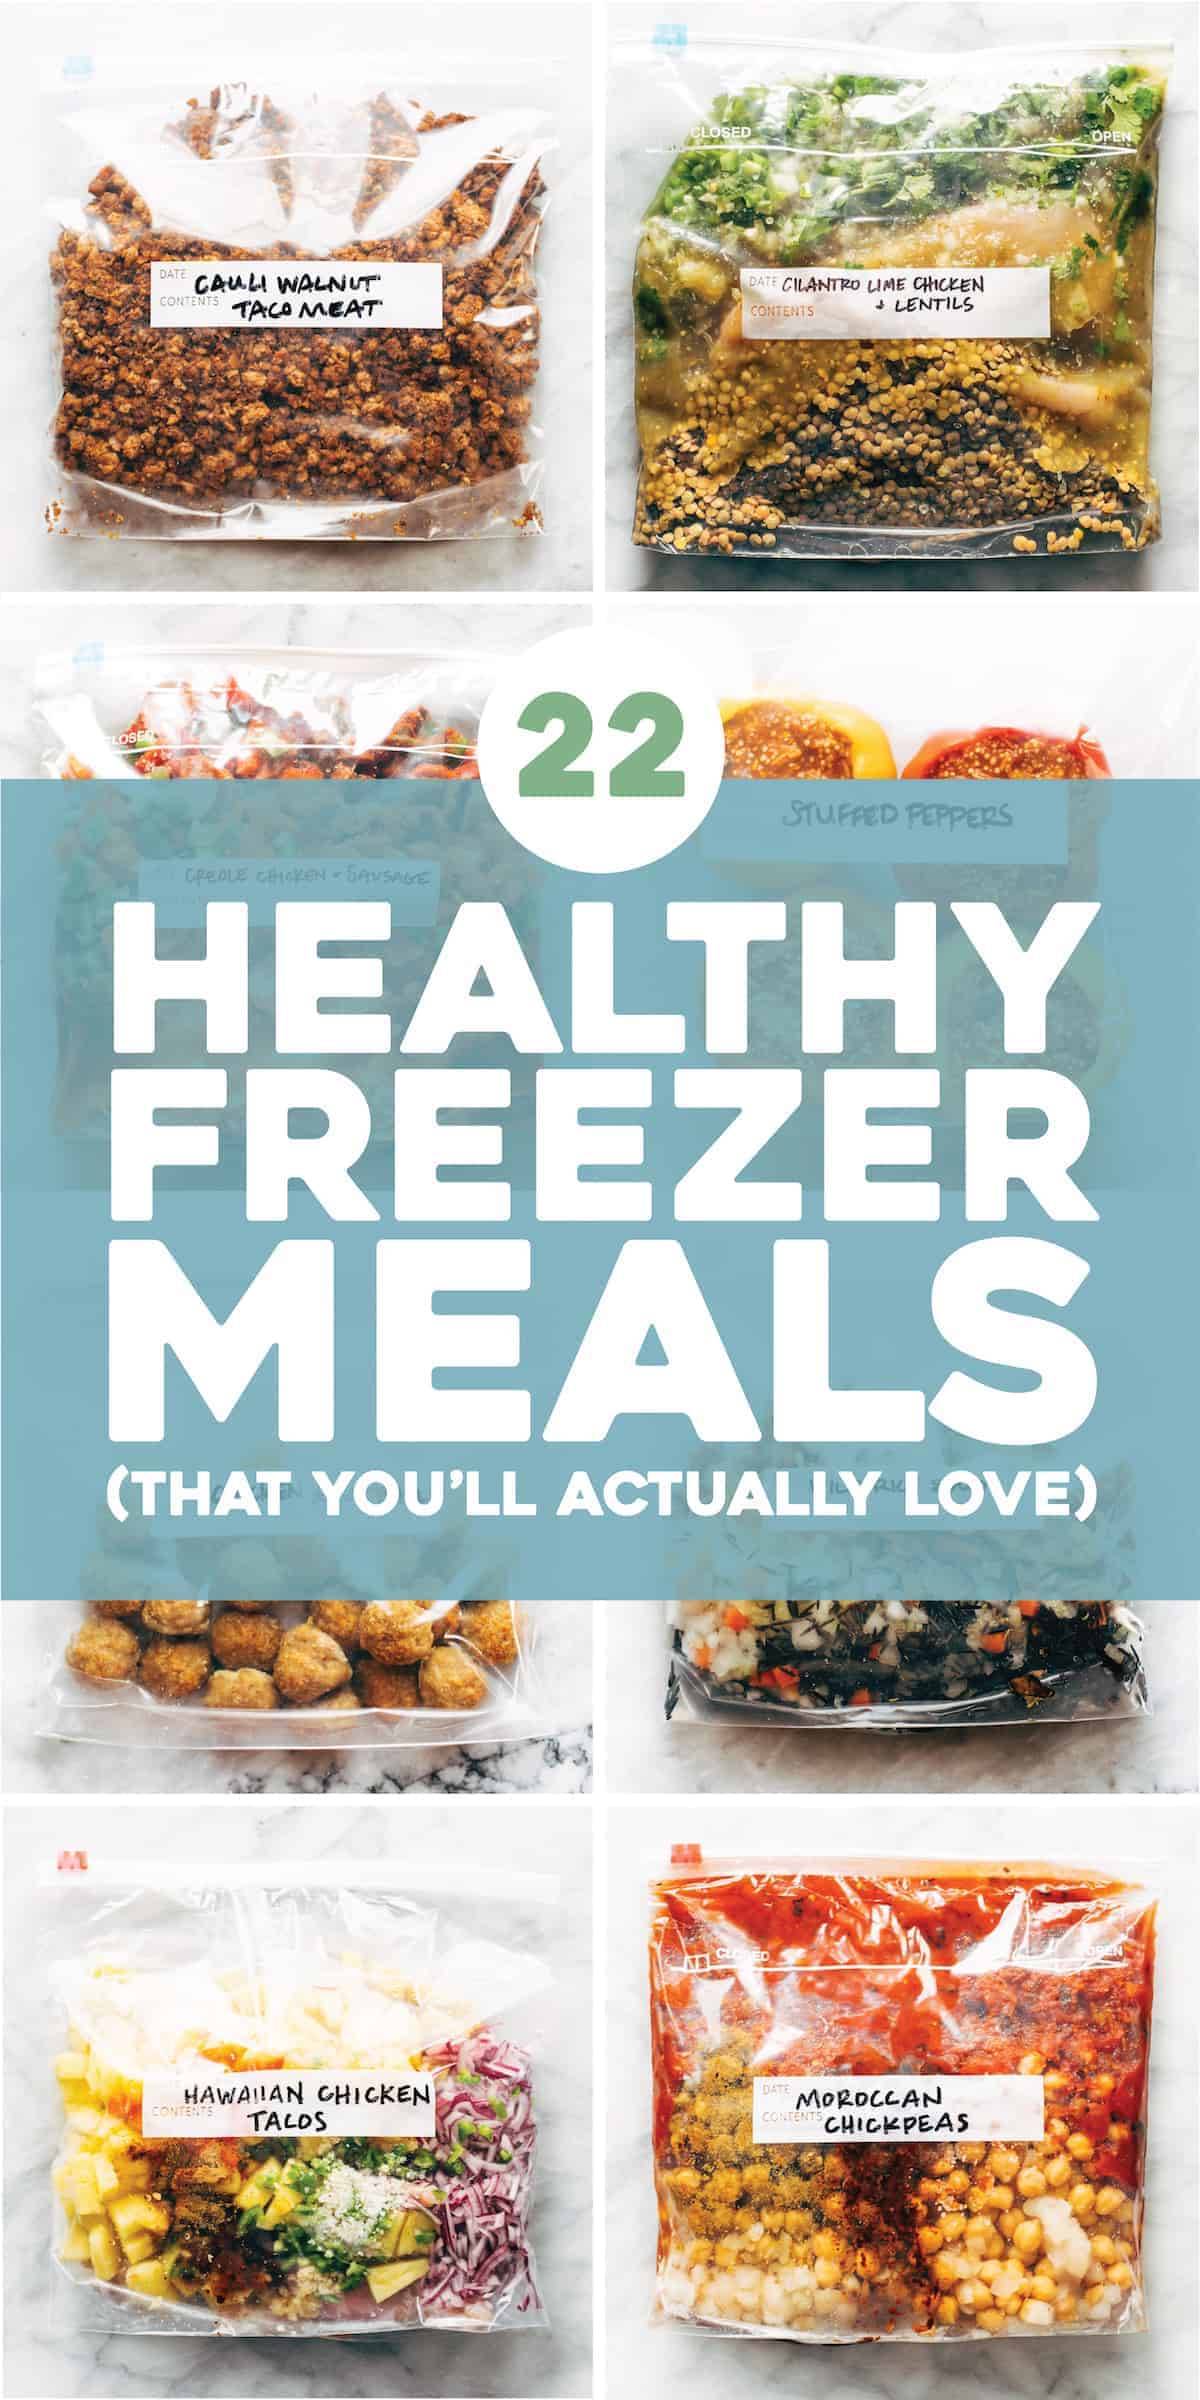 Freezer meals in plastic bags with "22 Healthy Freezer Meals That You'll Actually Love". 